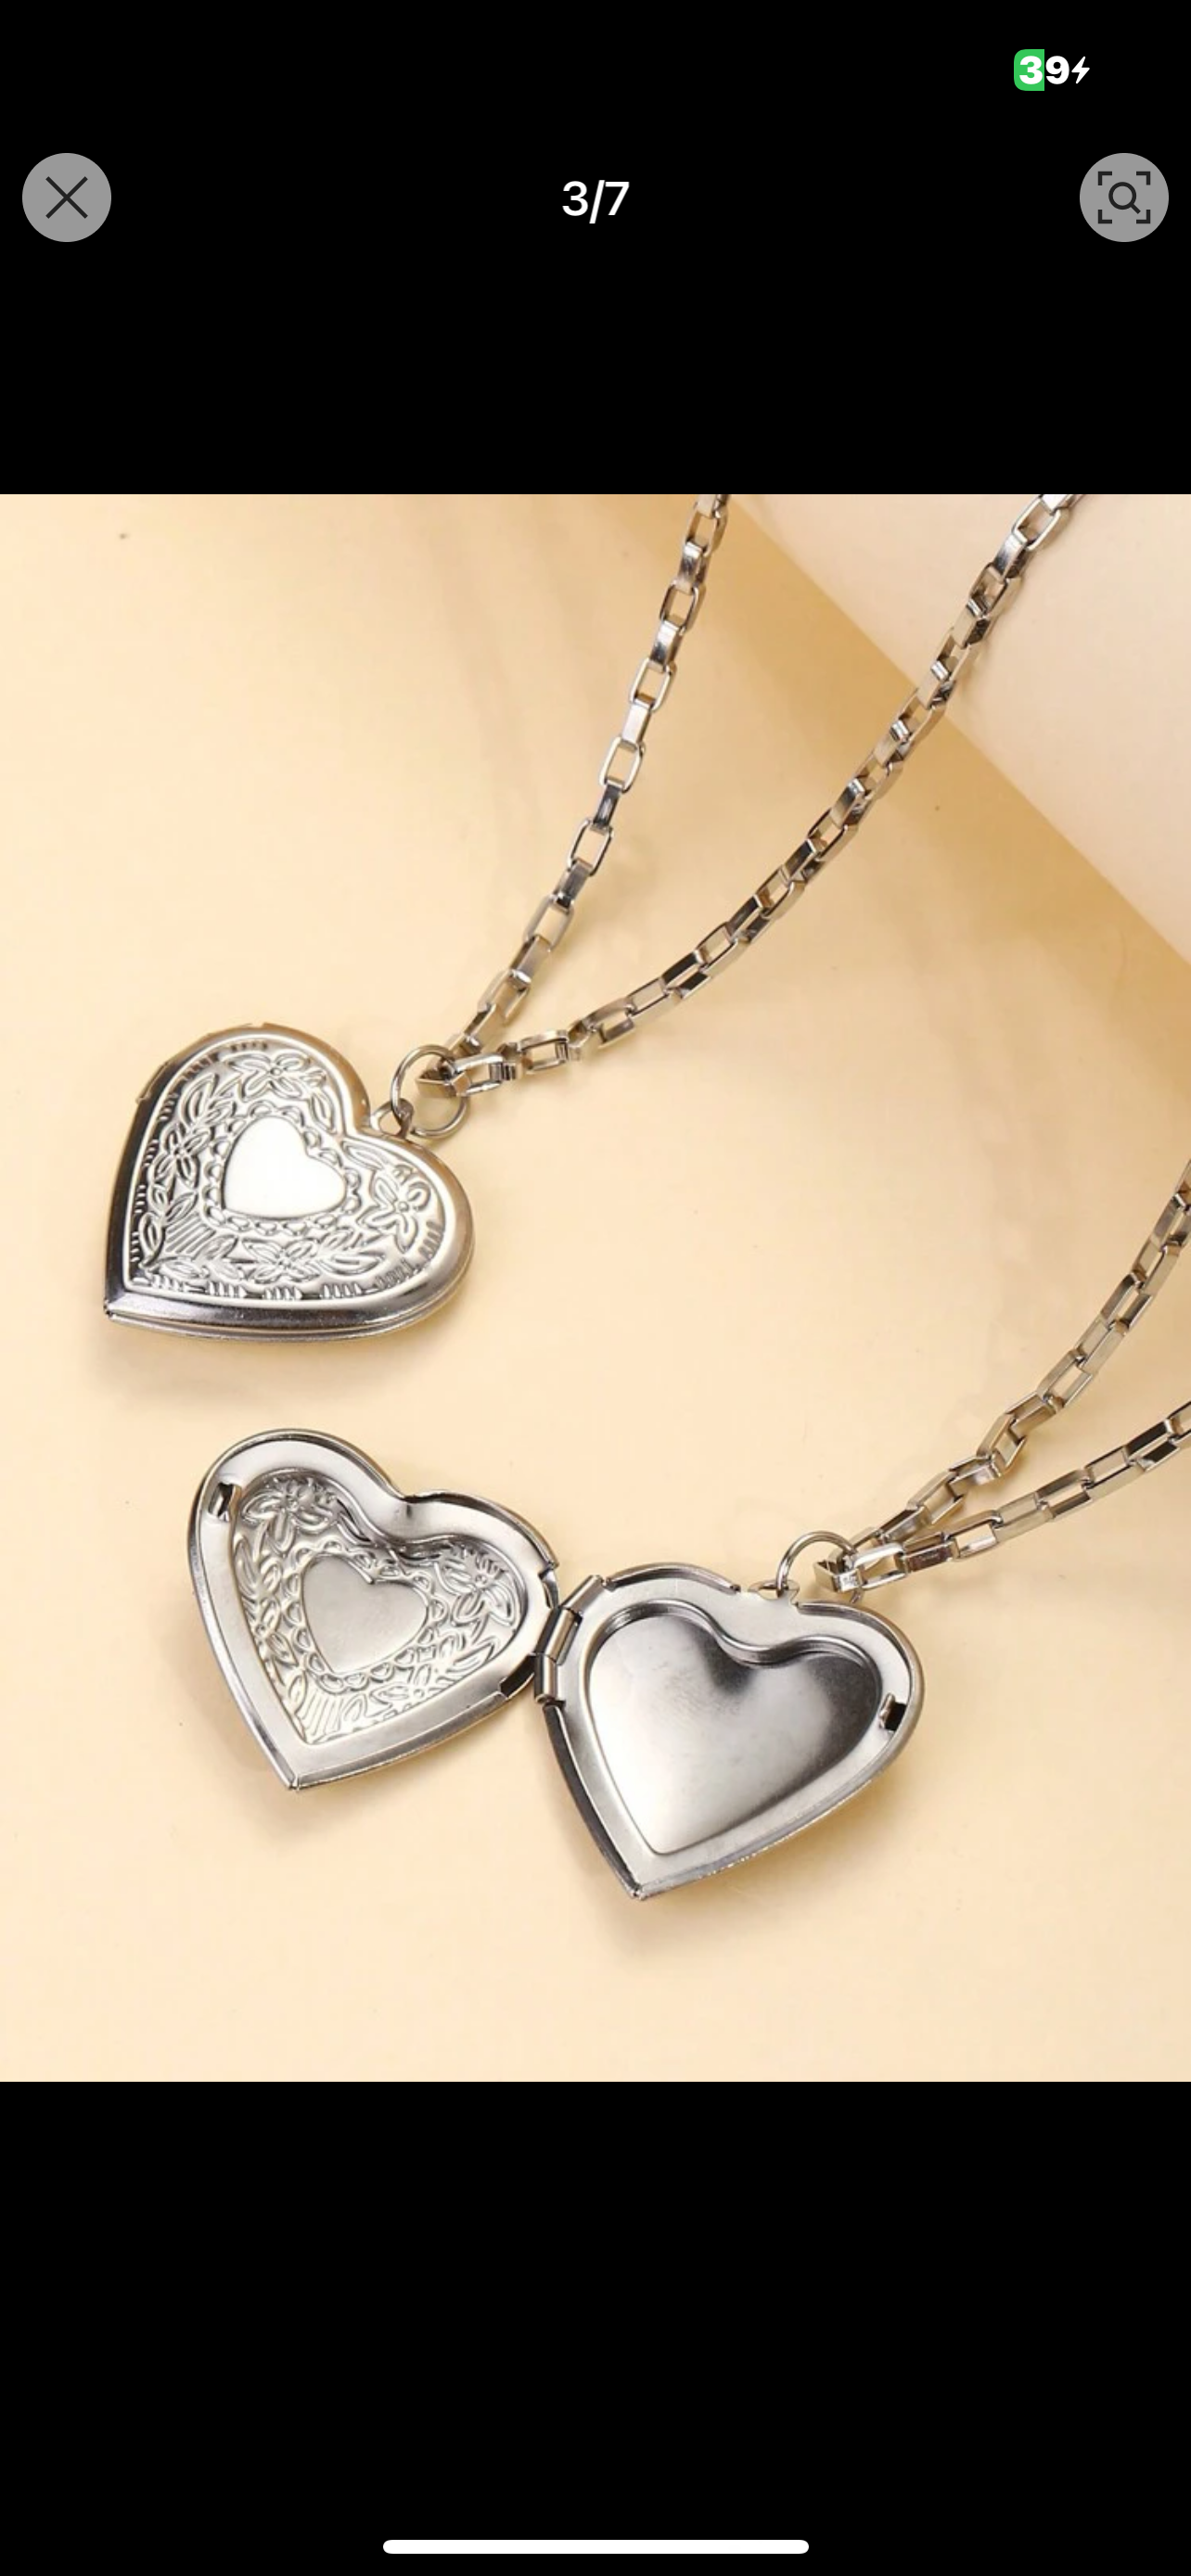 2pcs Stainless Steel Heart Locket Pendant Necklaces